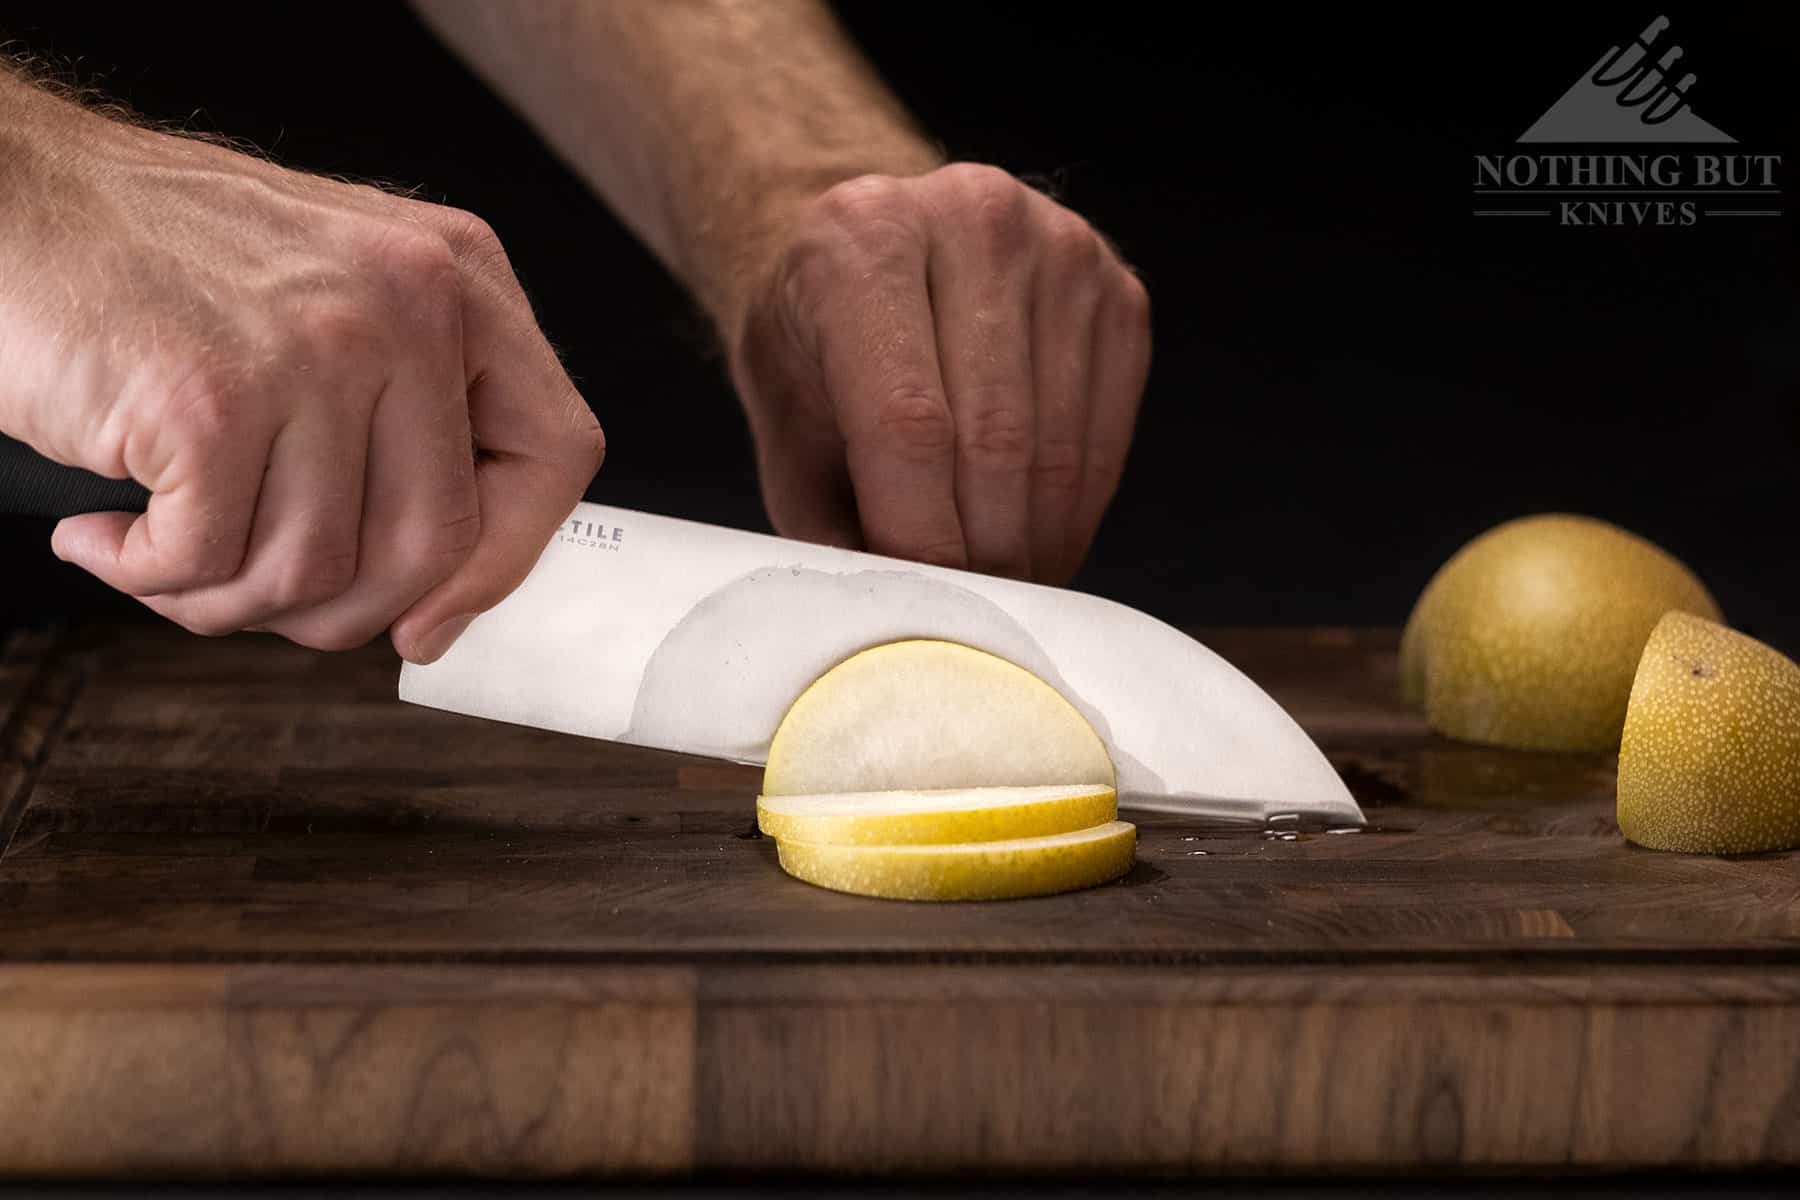 Close-up image of a the Tactile chef knife being used to slice an Asian pear to show its slicing ability.